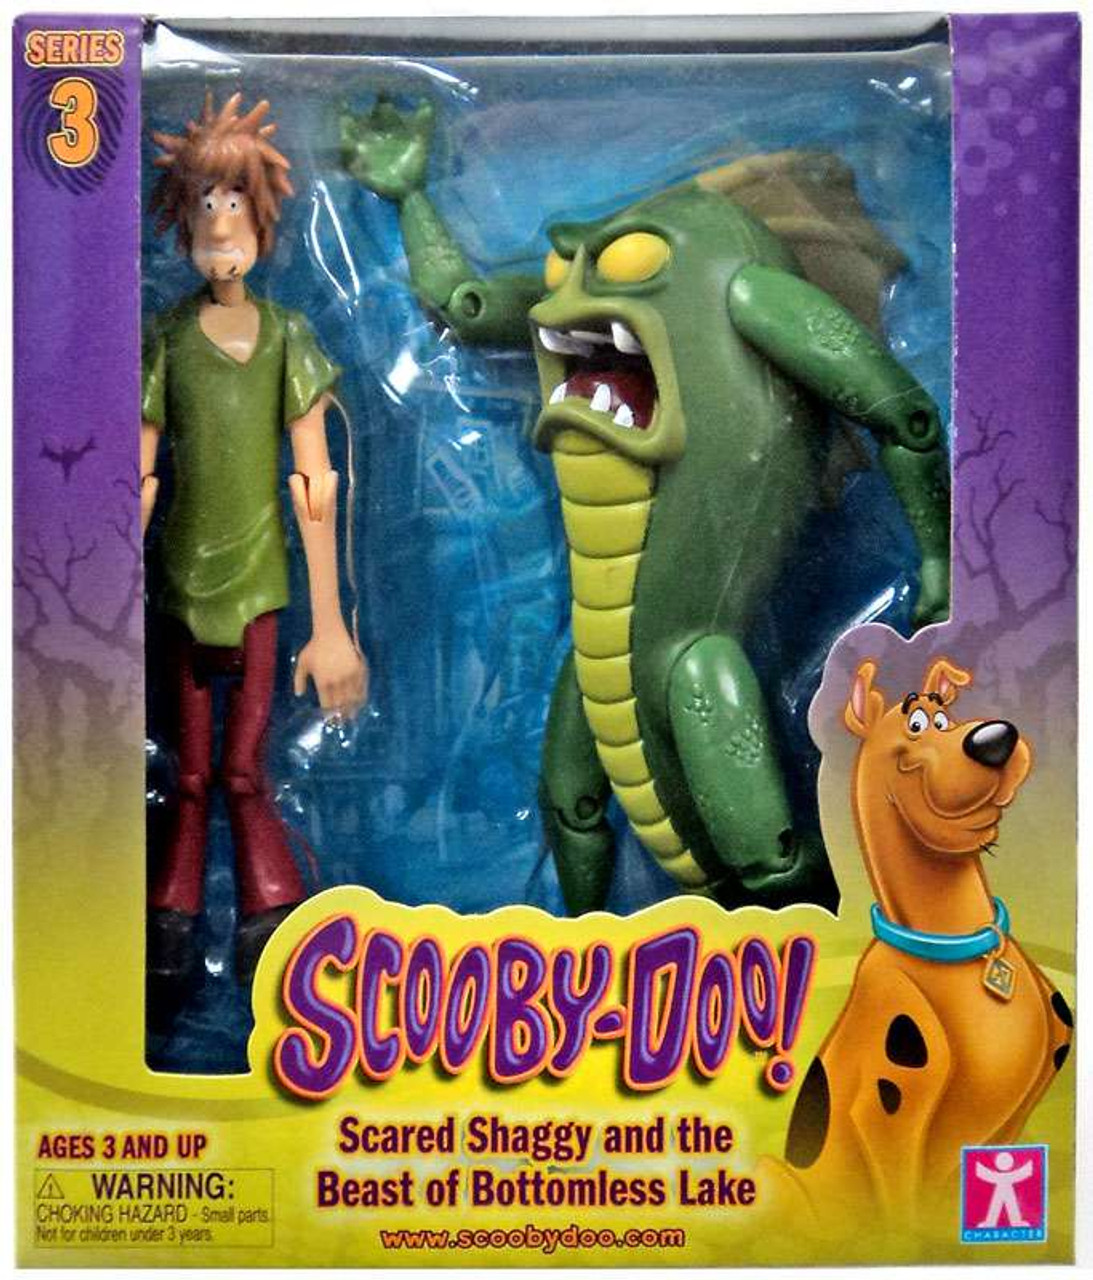 Scooby Doo Series 3 Scared Shaggy The Beast of Bottomless Lake Action ...